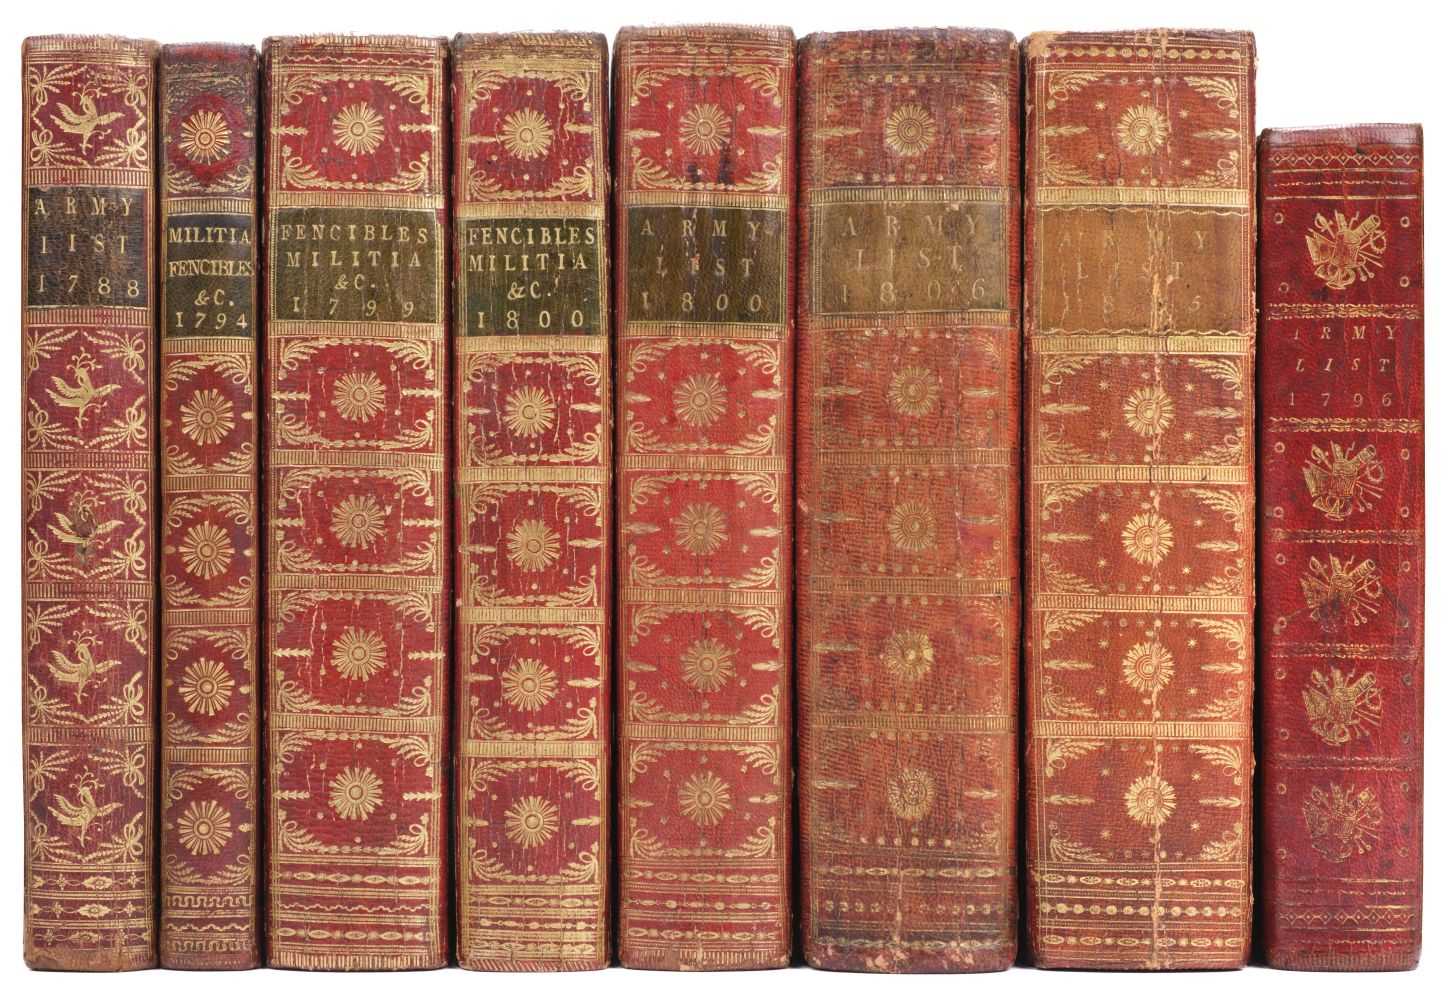 Lot 72 - Army Lists. 8 volumes, 1788-1815